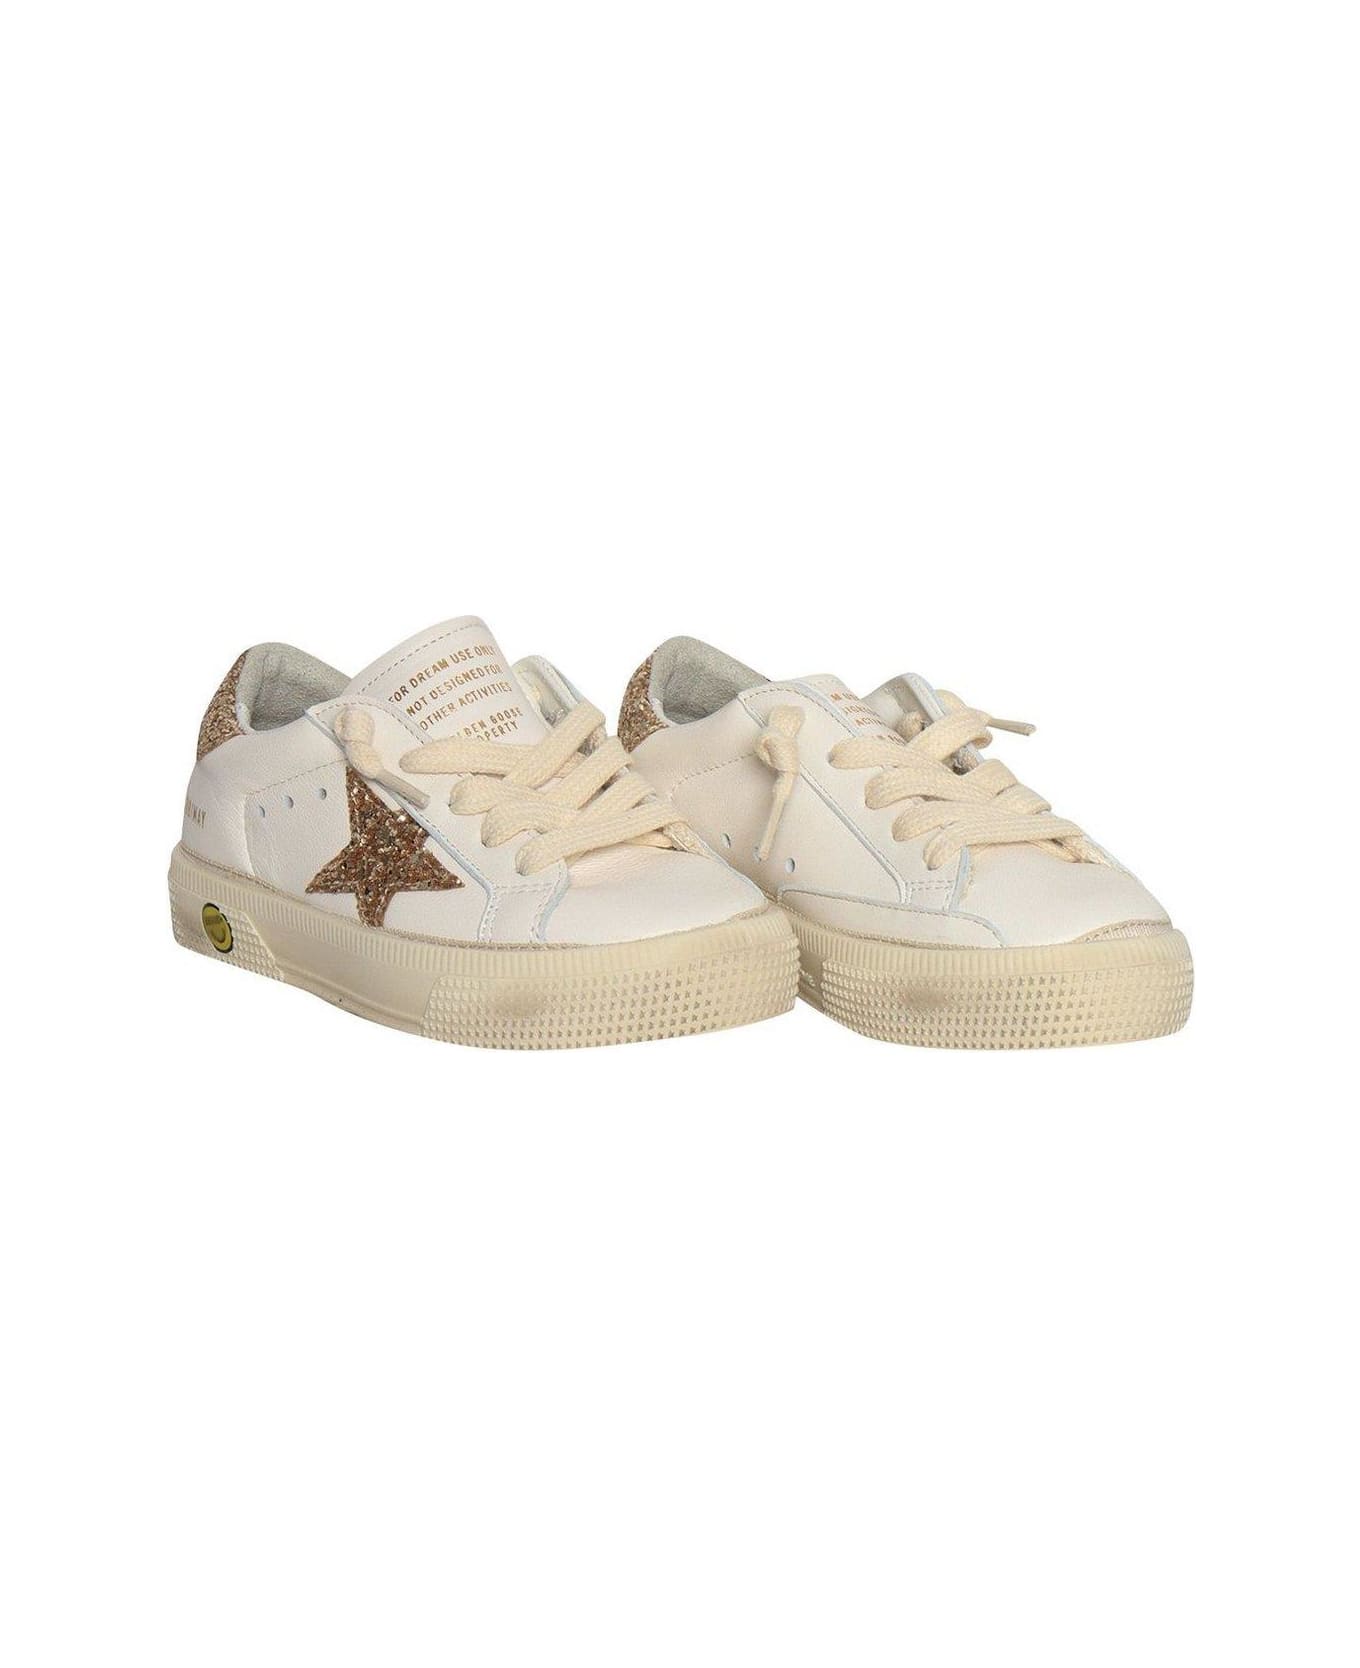 Golden Goose May Star Distressed Low-top Sneakers - White Gold